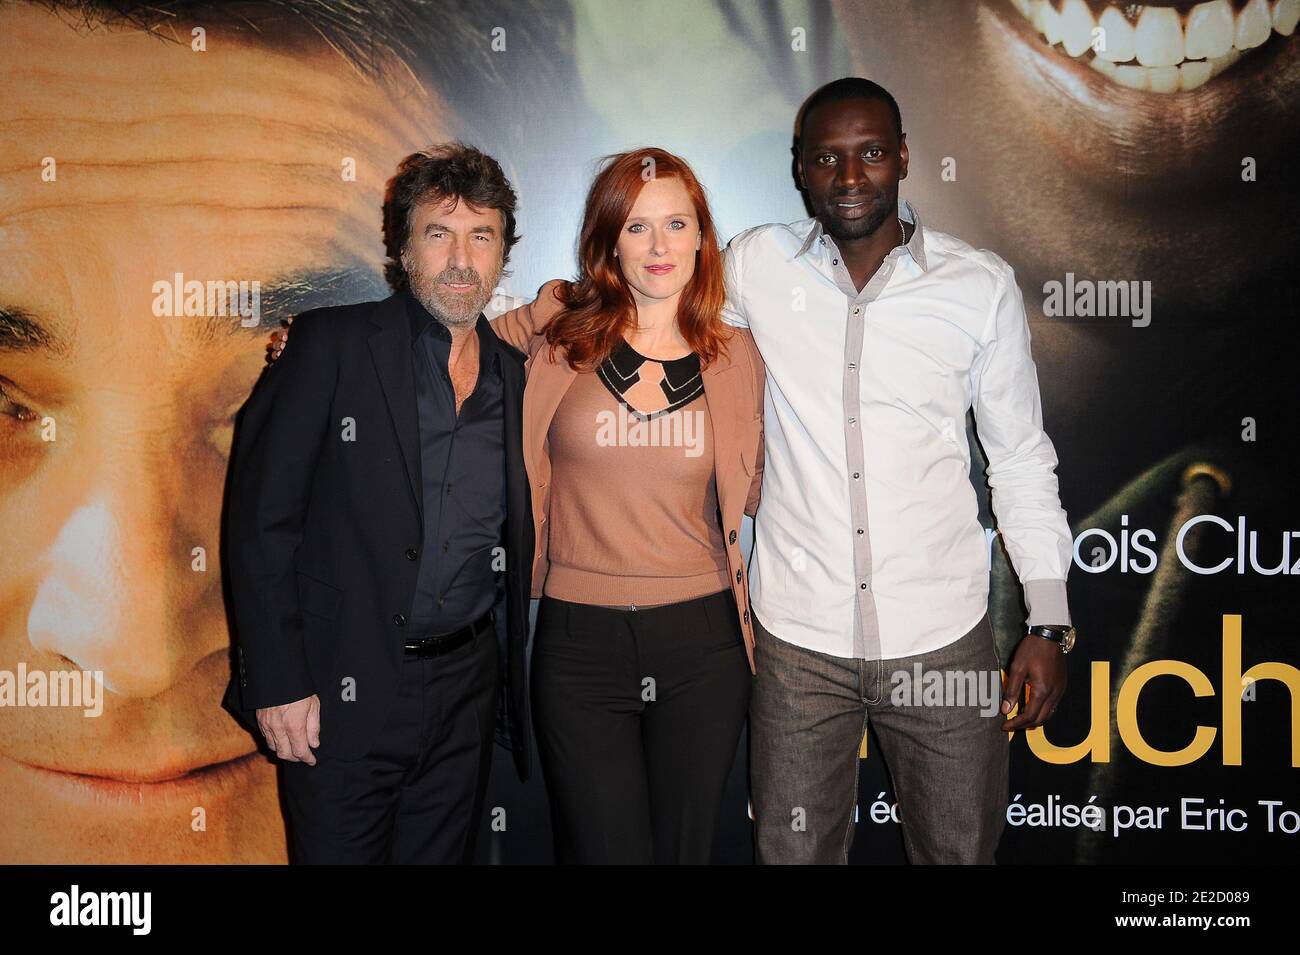 Francois Cluzet, Audrey Fleurot and Omar Sy attending the Premiere of 'Intouchables' held at Cinema Gaumont Marignan in Paris, France on October 18, 2011. Photo by Nicolas Briquet/ABACAPRESS.COM Stock Photo